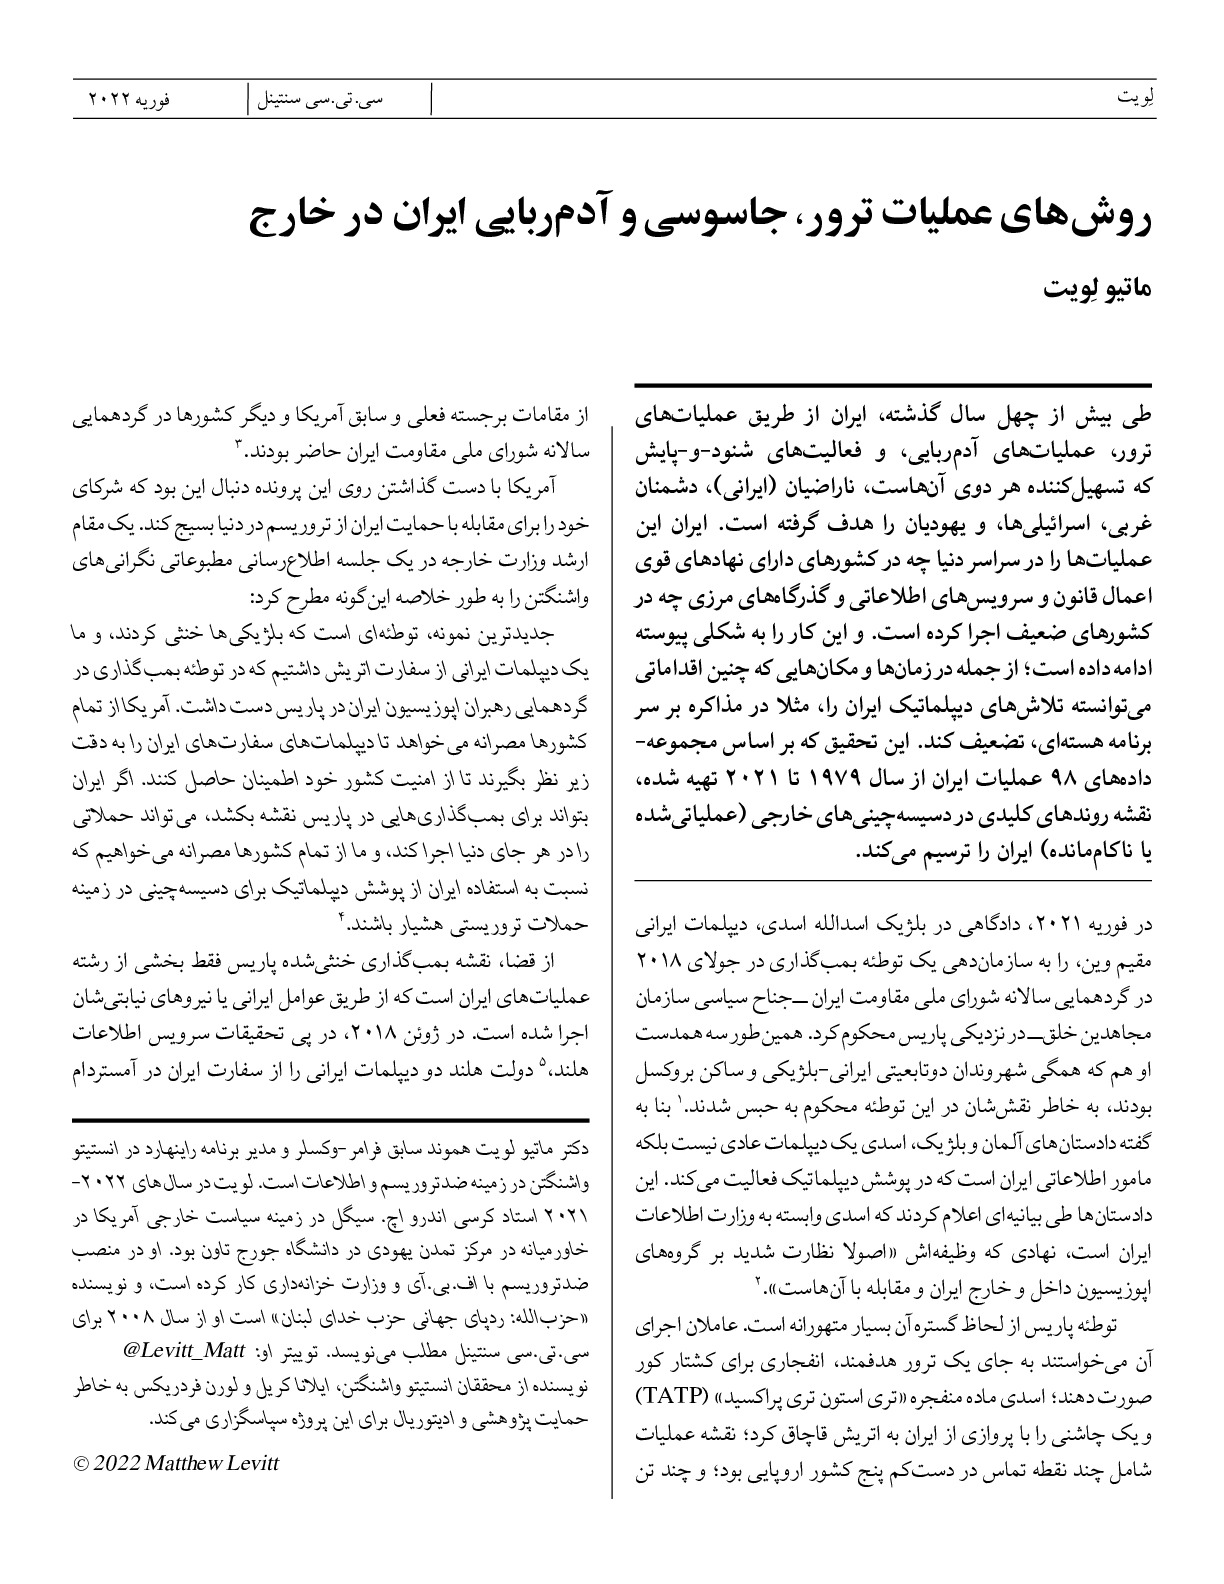 Trends in Iranian External Assassination, Surveillance, and Abduction Plots - Persian Edition.pdf